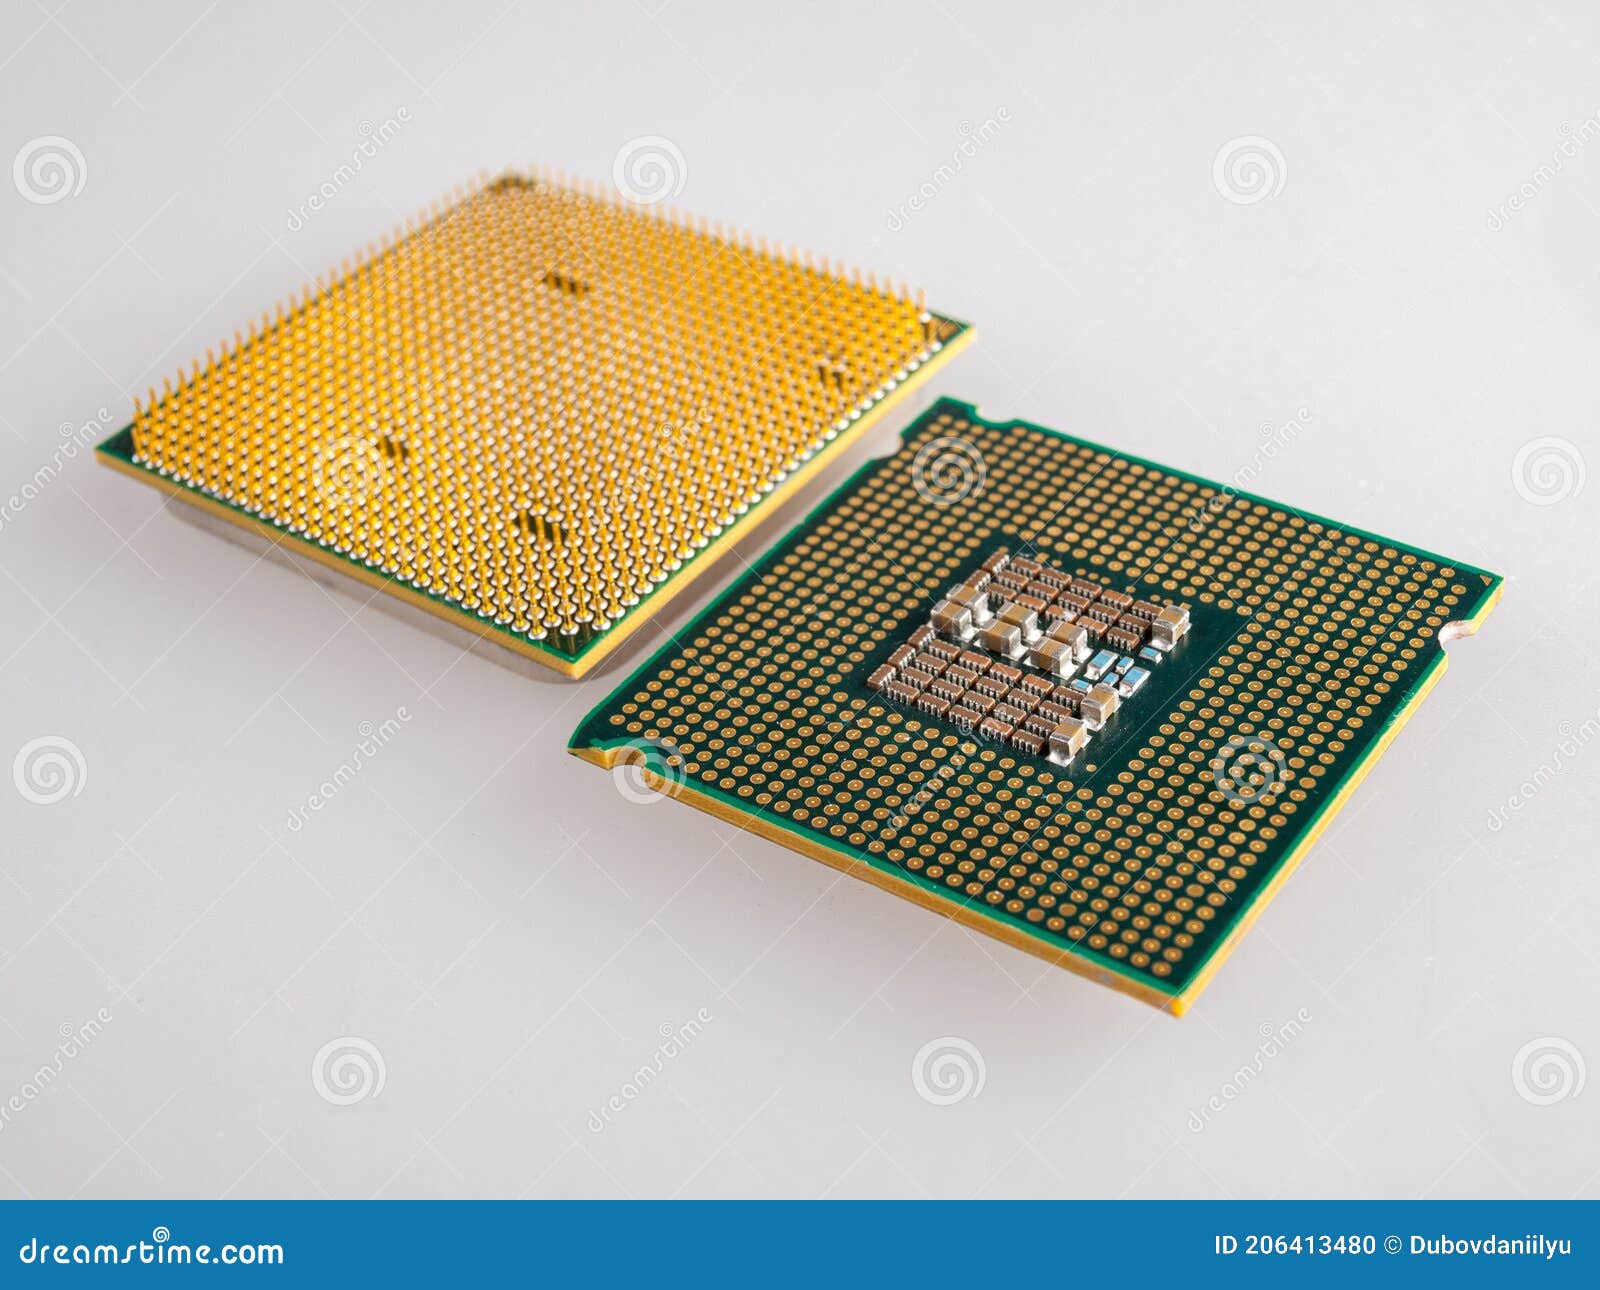 pastel fest Alle slags Interchangeable Silicon Microprocessors for Desktop, Server, Laptop, Cpu  Surface with Contacts for Installation in the Motherboard Stock Photo -  Image of engineering, connector: 206413480